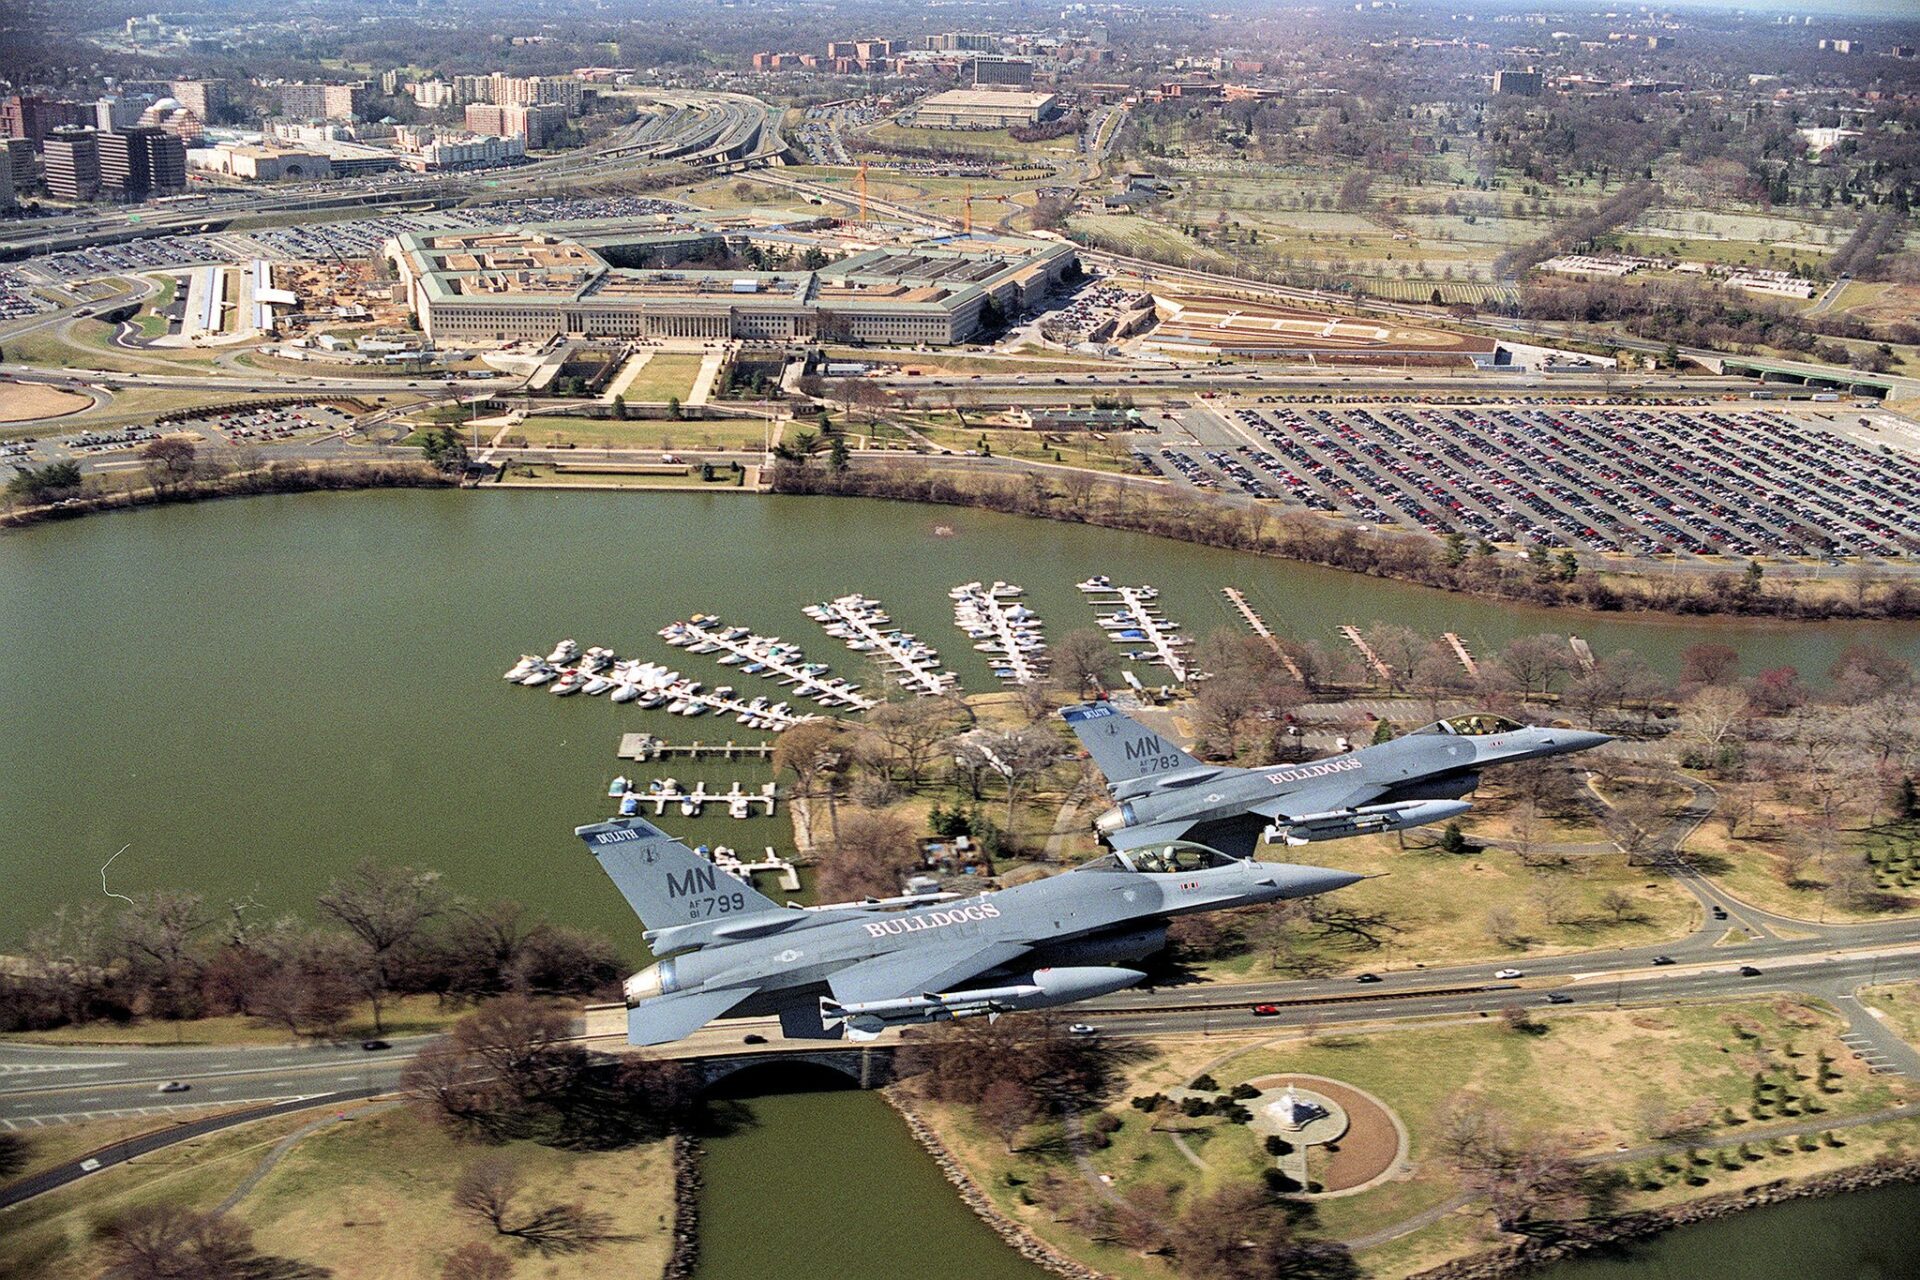 148th Fighter Wing F-16s performing air patrol over the Pentagon (US Air Force via Wikimedia Commons)